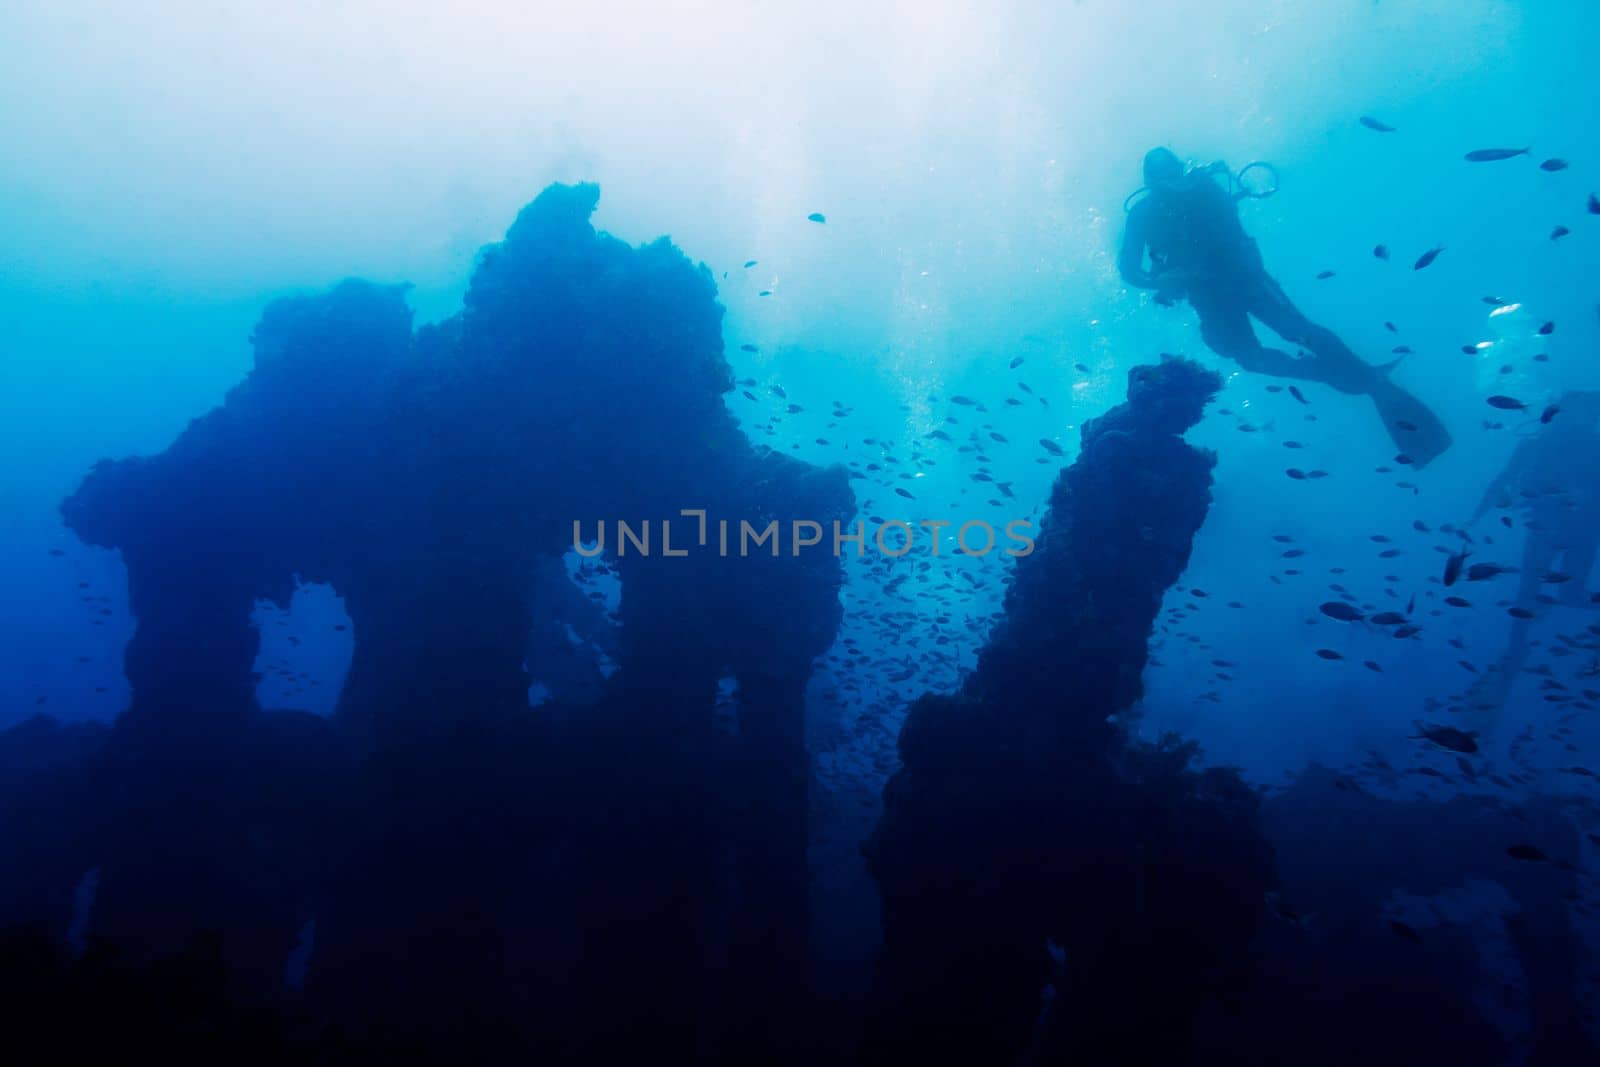 a person dives placidly on the old remains of a sunken ship. Hundreds of fish surround the mysterious wreck that rests at the bottom of a turbid blue sea